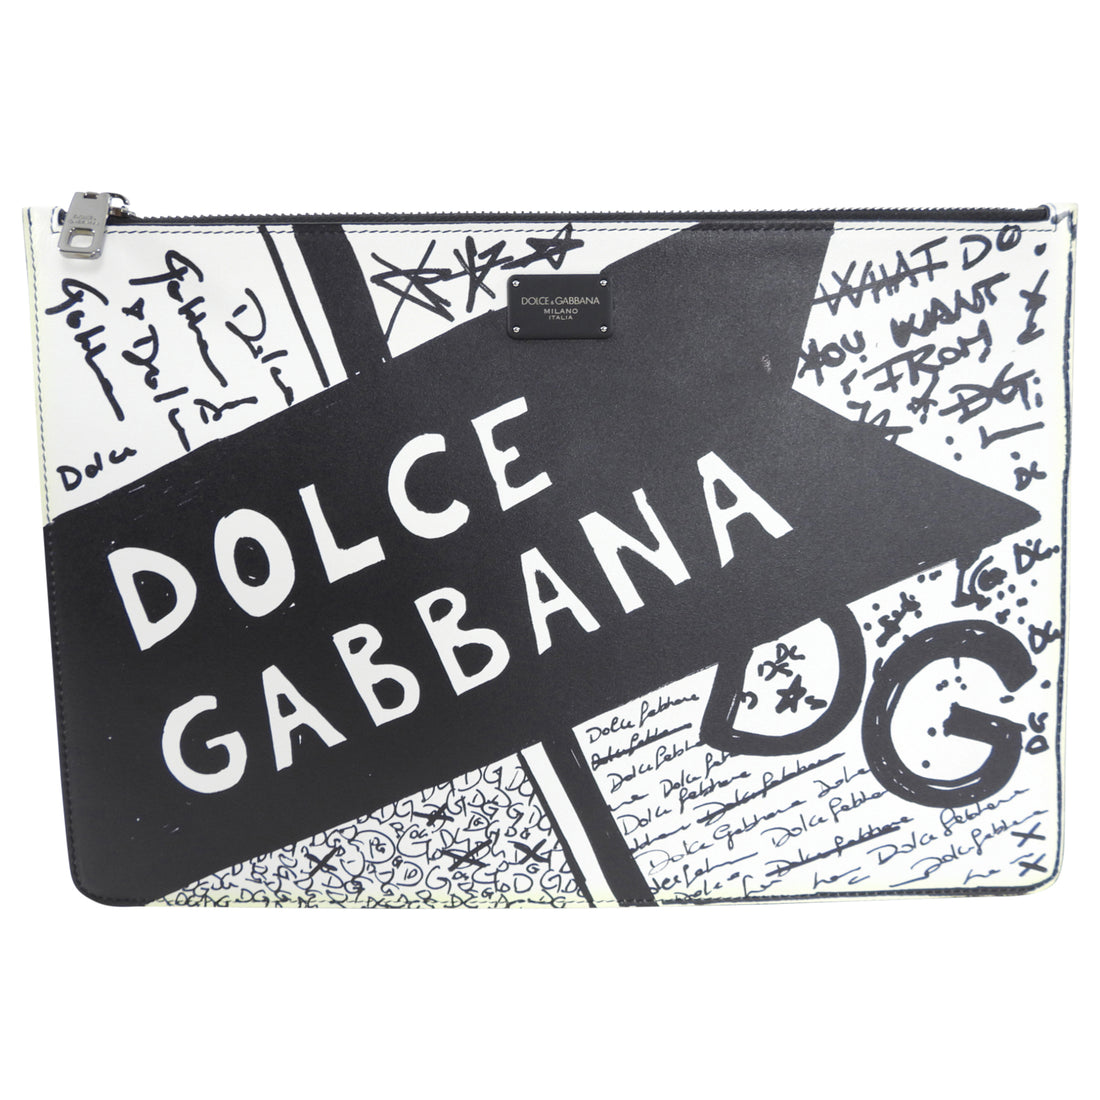 Dolce & Gabbana Black and White Leather Flat Pouch Clutch